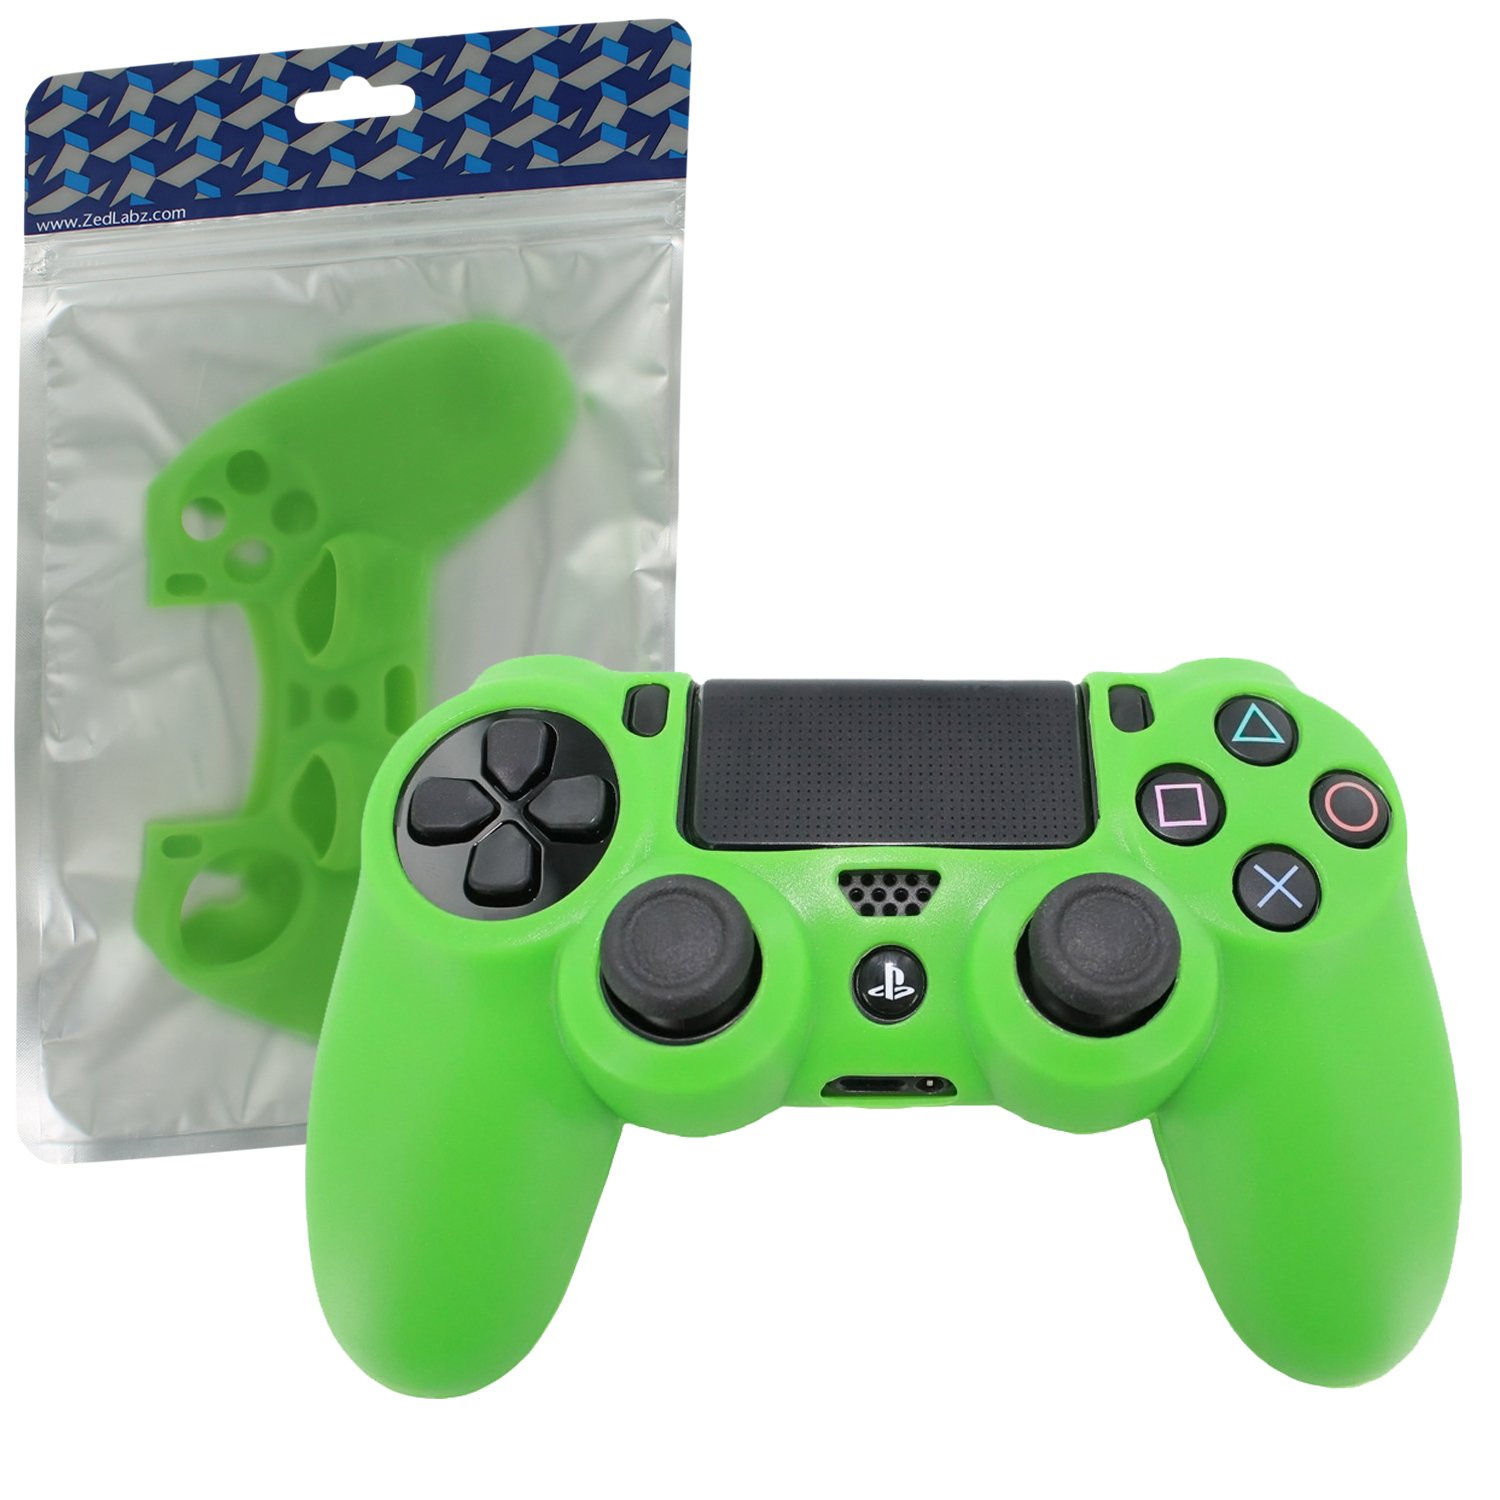 Kop Zedlabz Soft Silicone Rubber Skin Grip Cover For Sony Ps4 Controller With Ribbed Handle Green